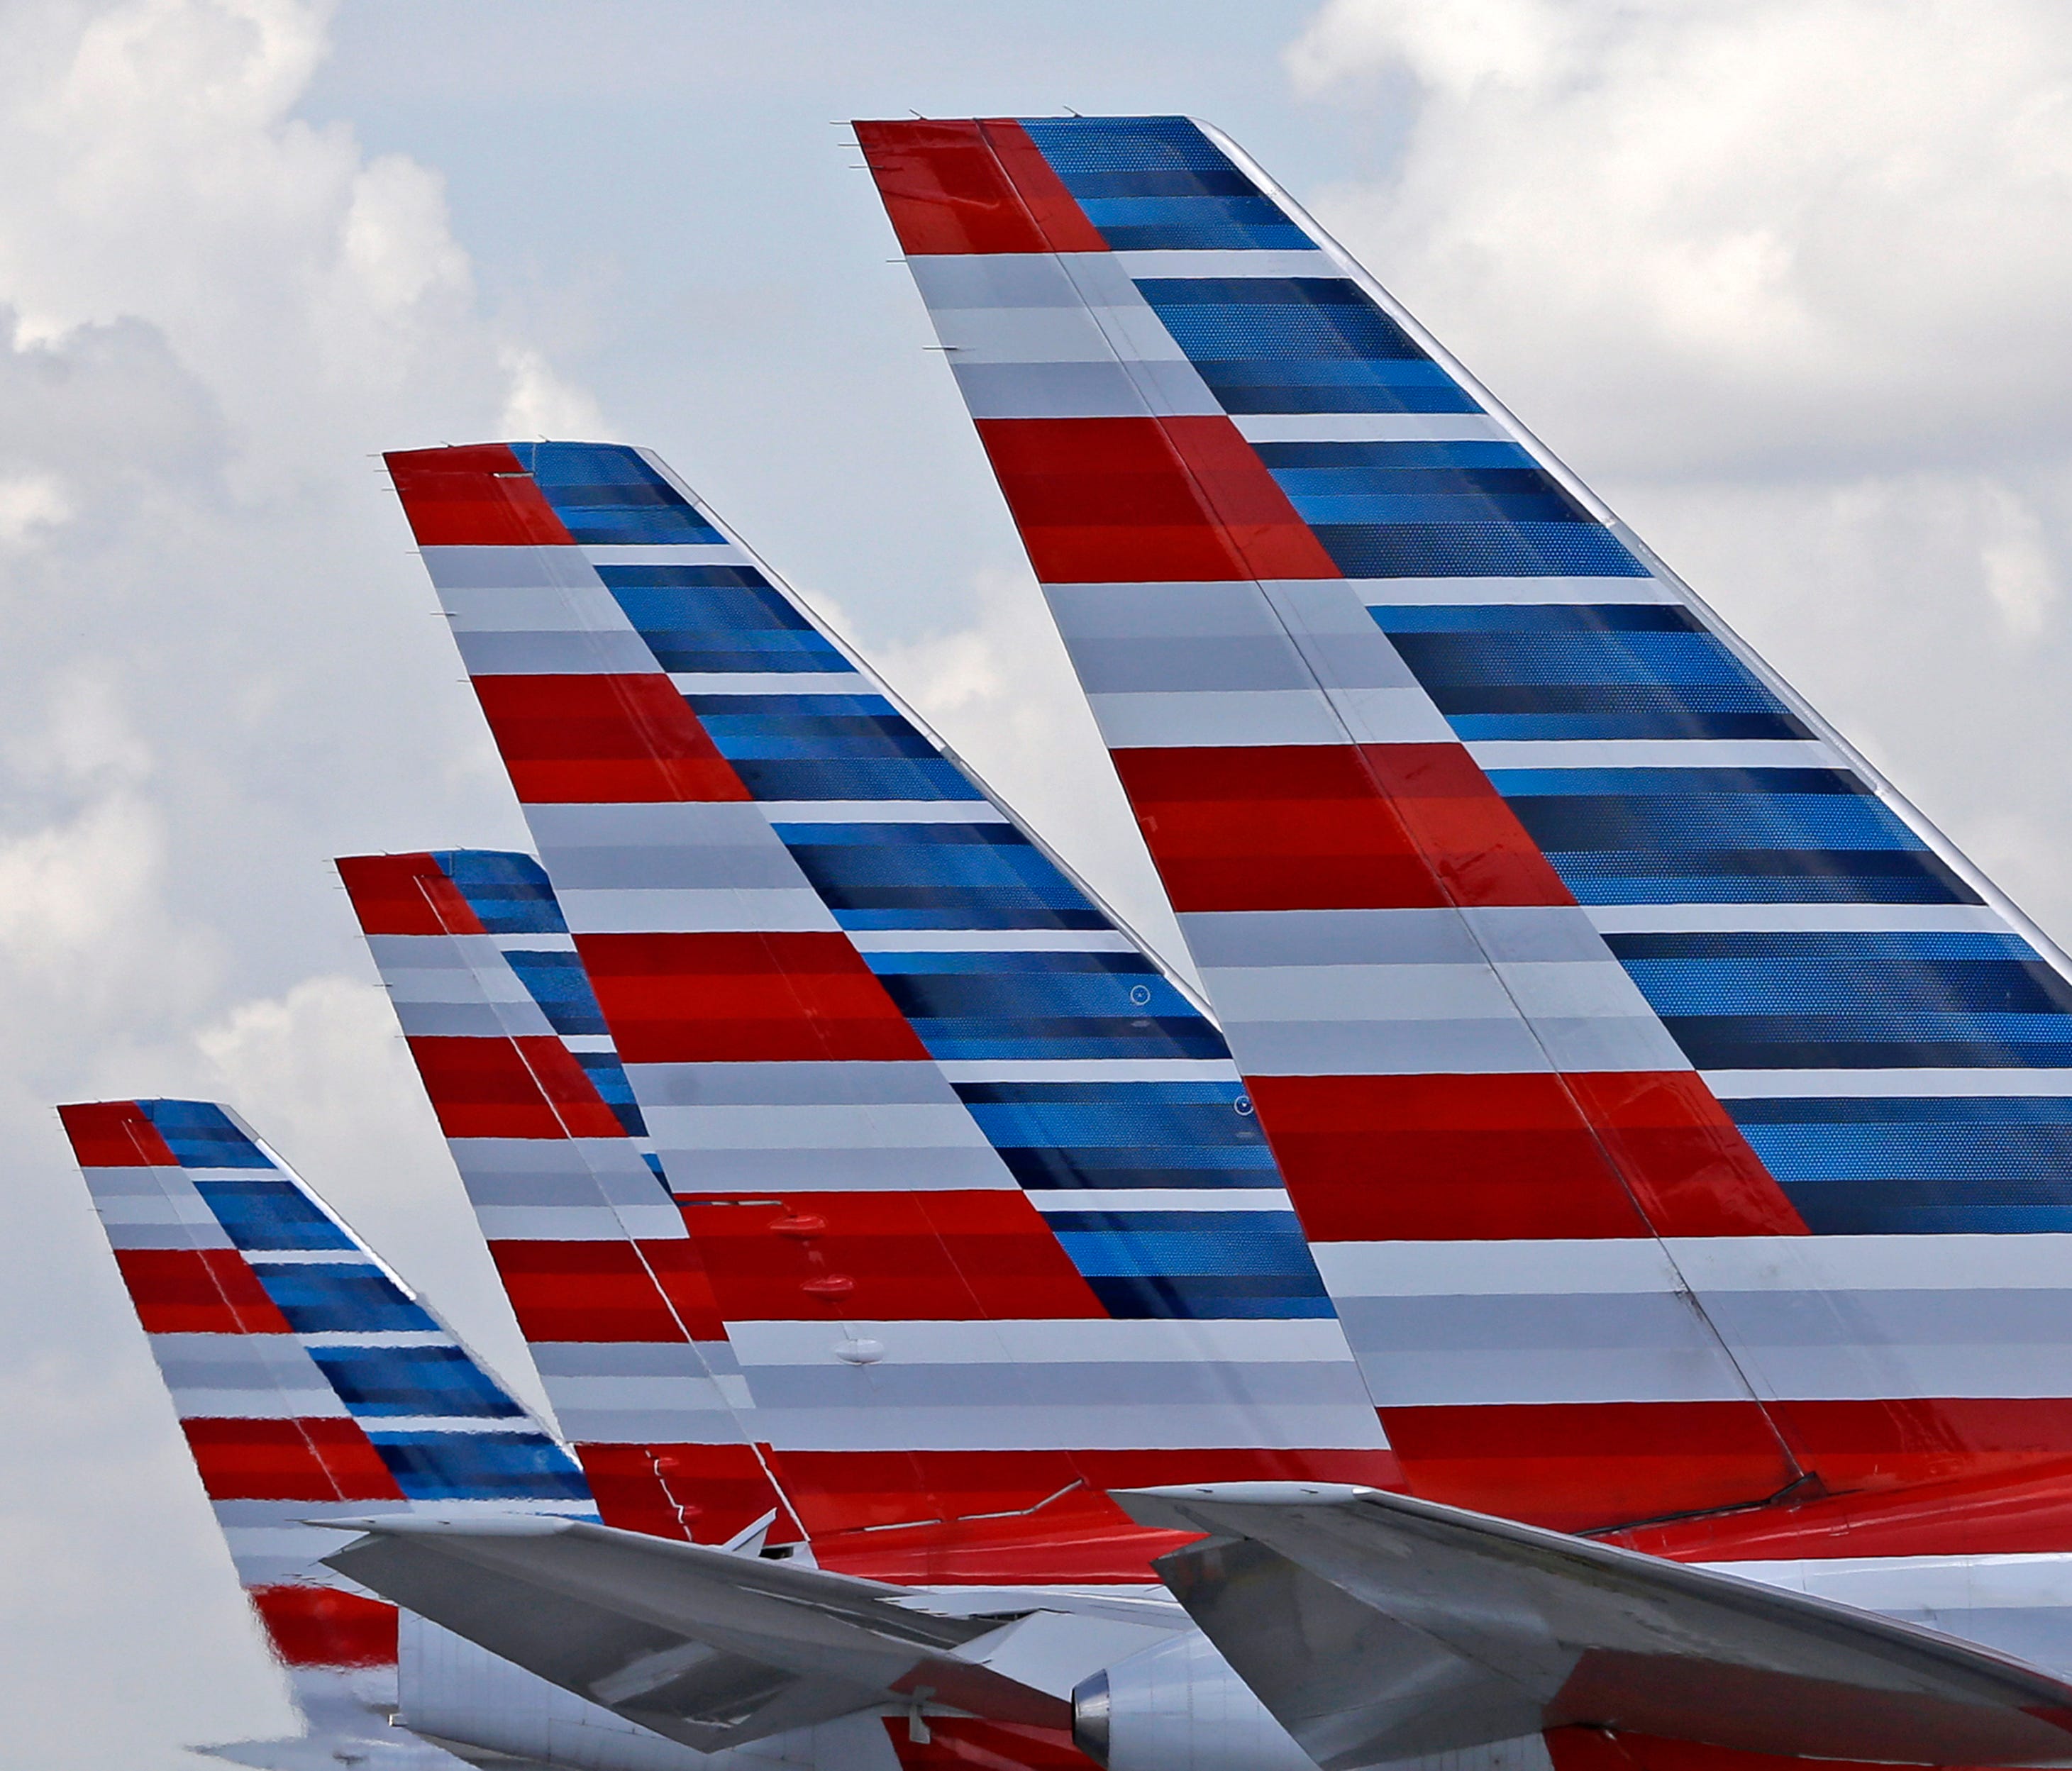 American Airlines planes parked at Miami International Airport.